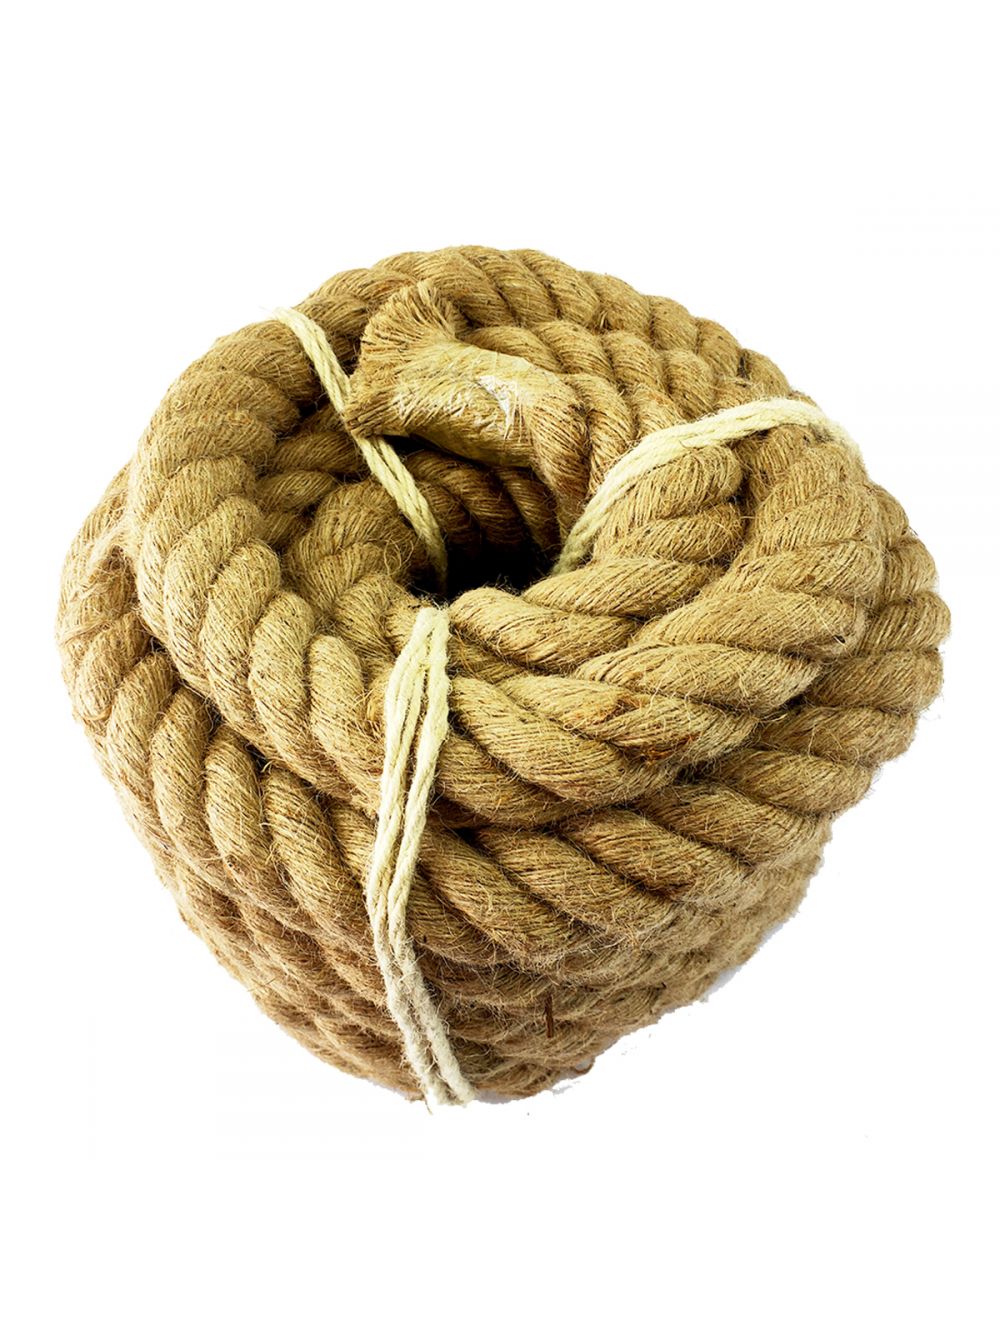 Dody Online Store Natural Jute Rope Burlap Hemp Twine Hessian Cord 50mm  Thick 10m long Local Pickup, Local Shop, Drop Shipping